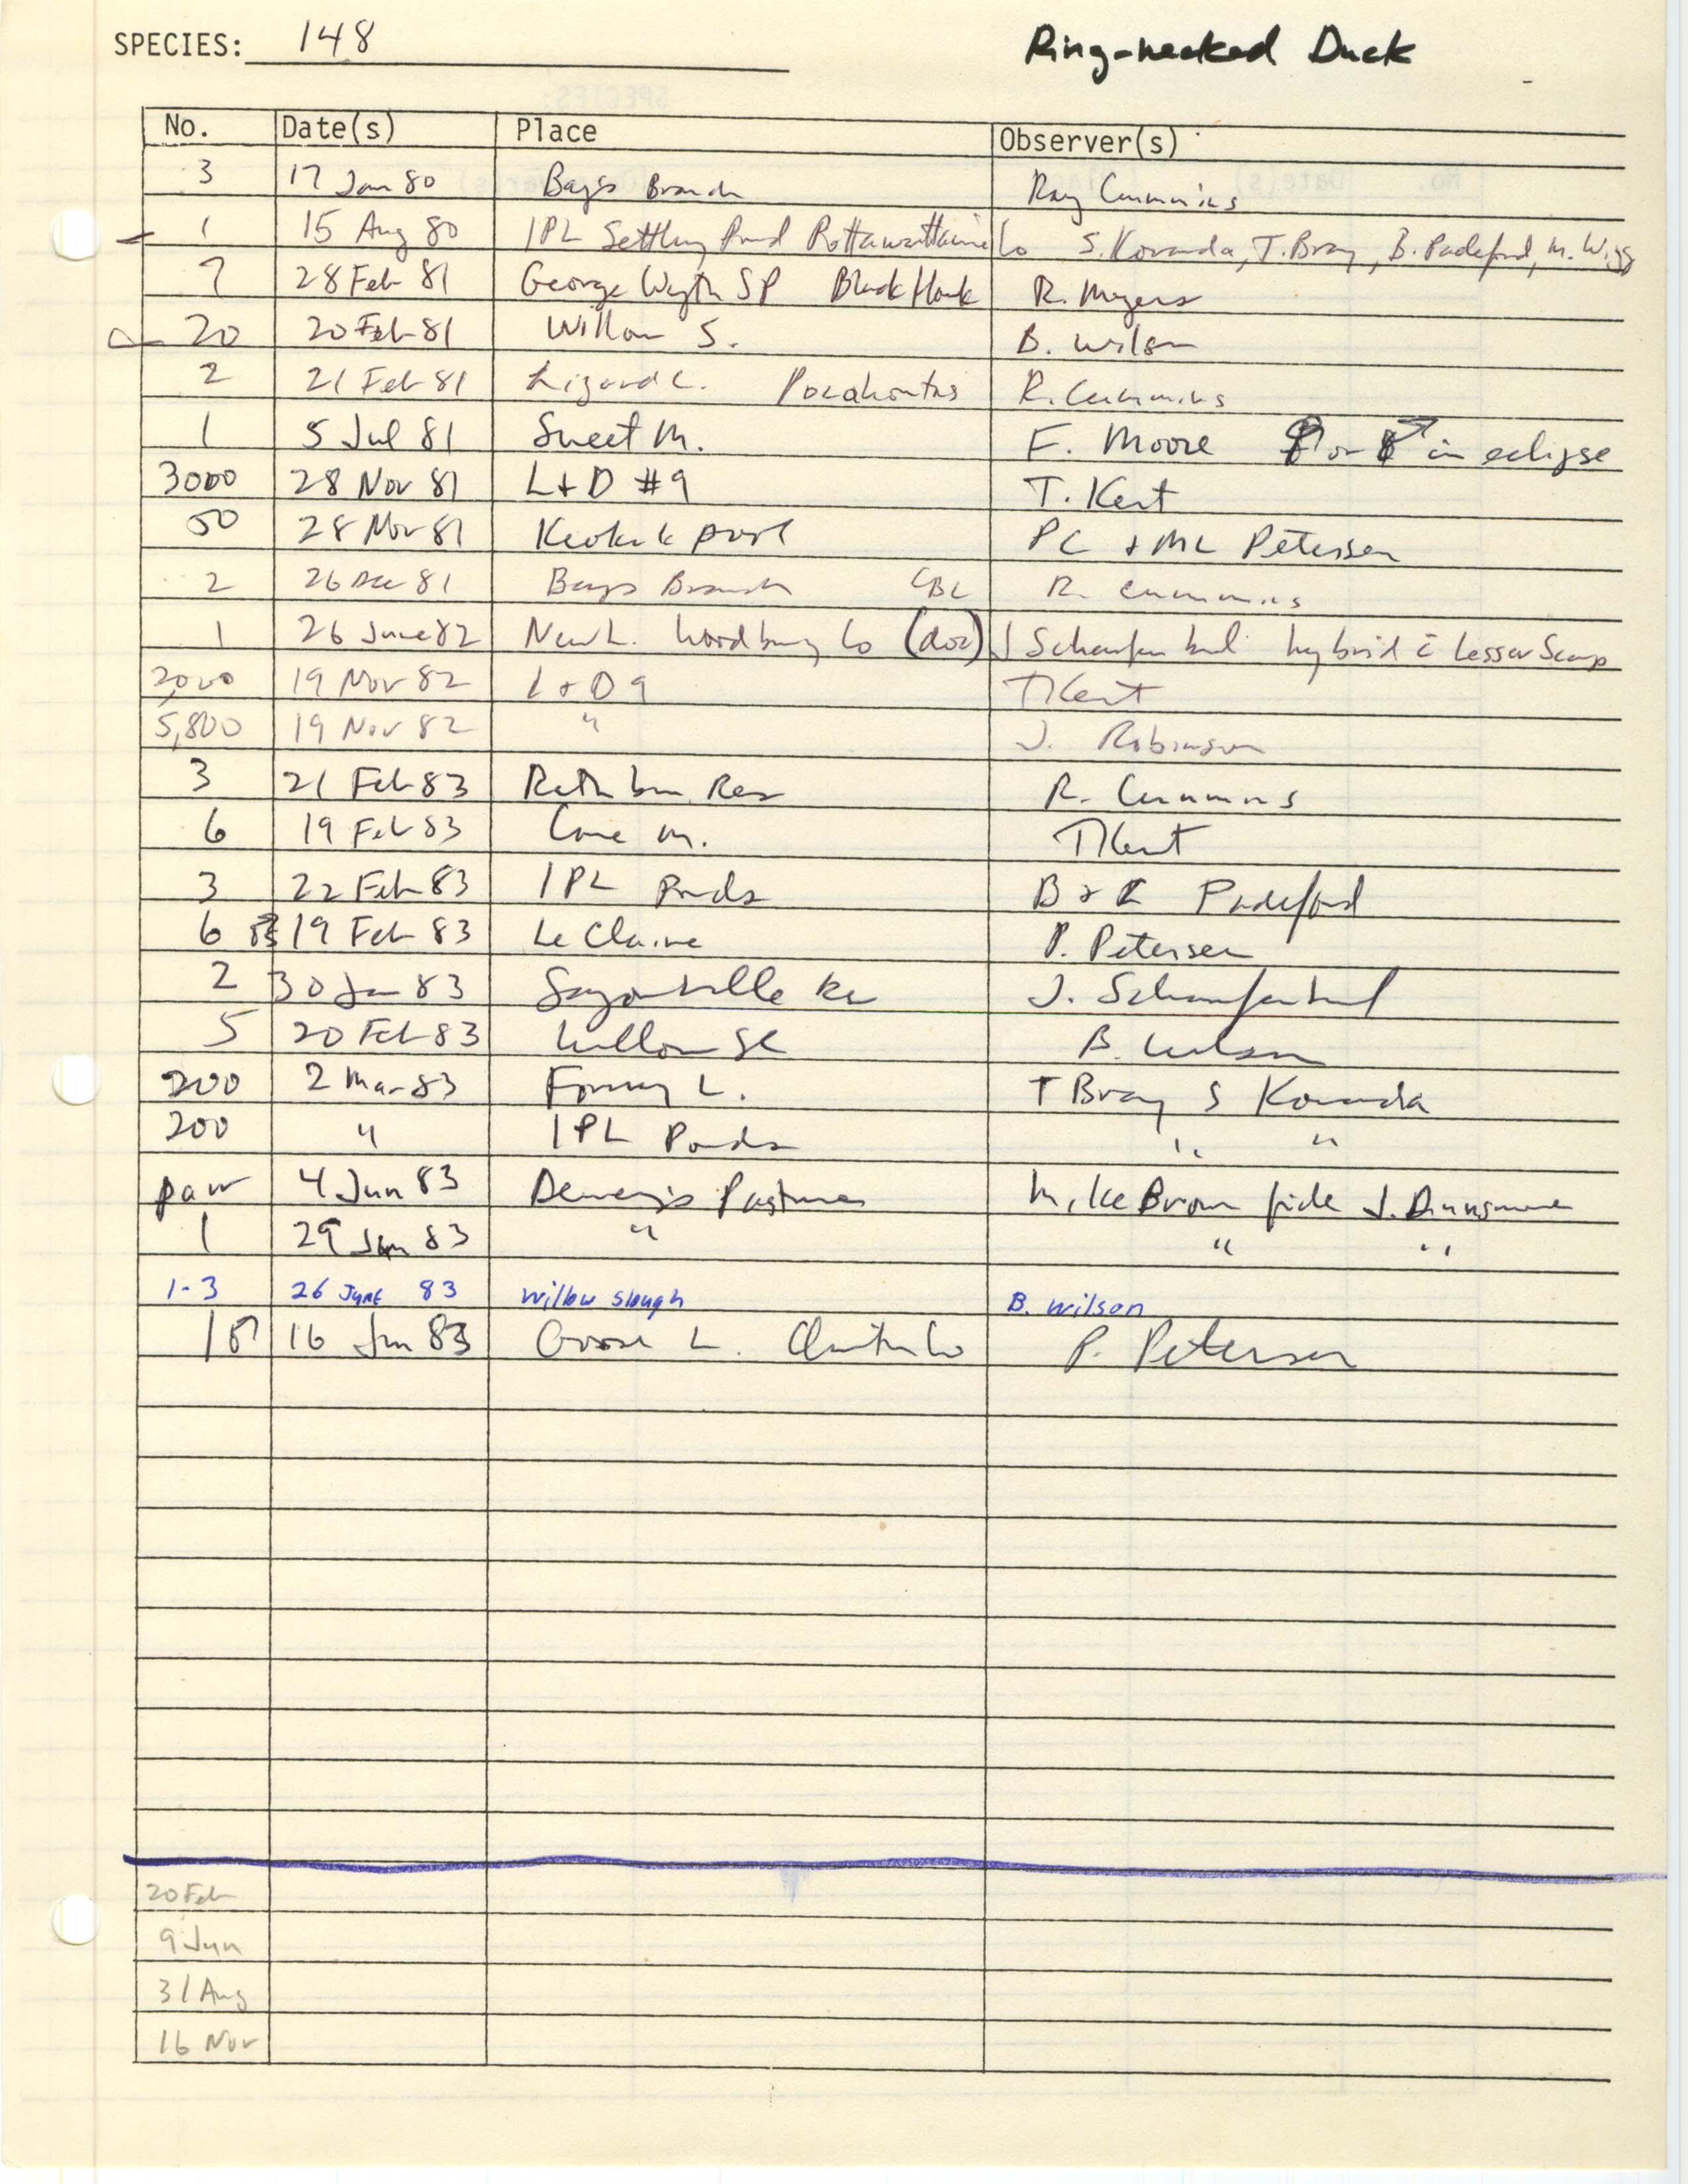 Iowa Ornithologists' Union, field report compiled data, Ring-necked Duck, 1980-1983